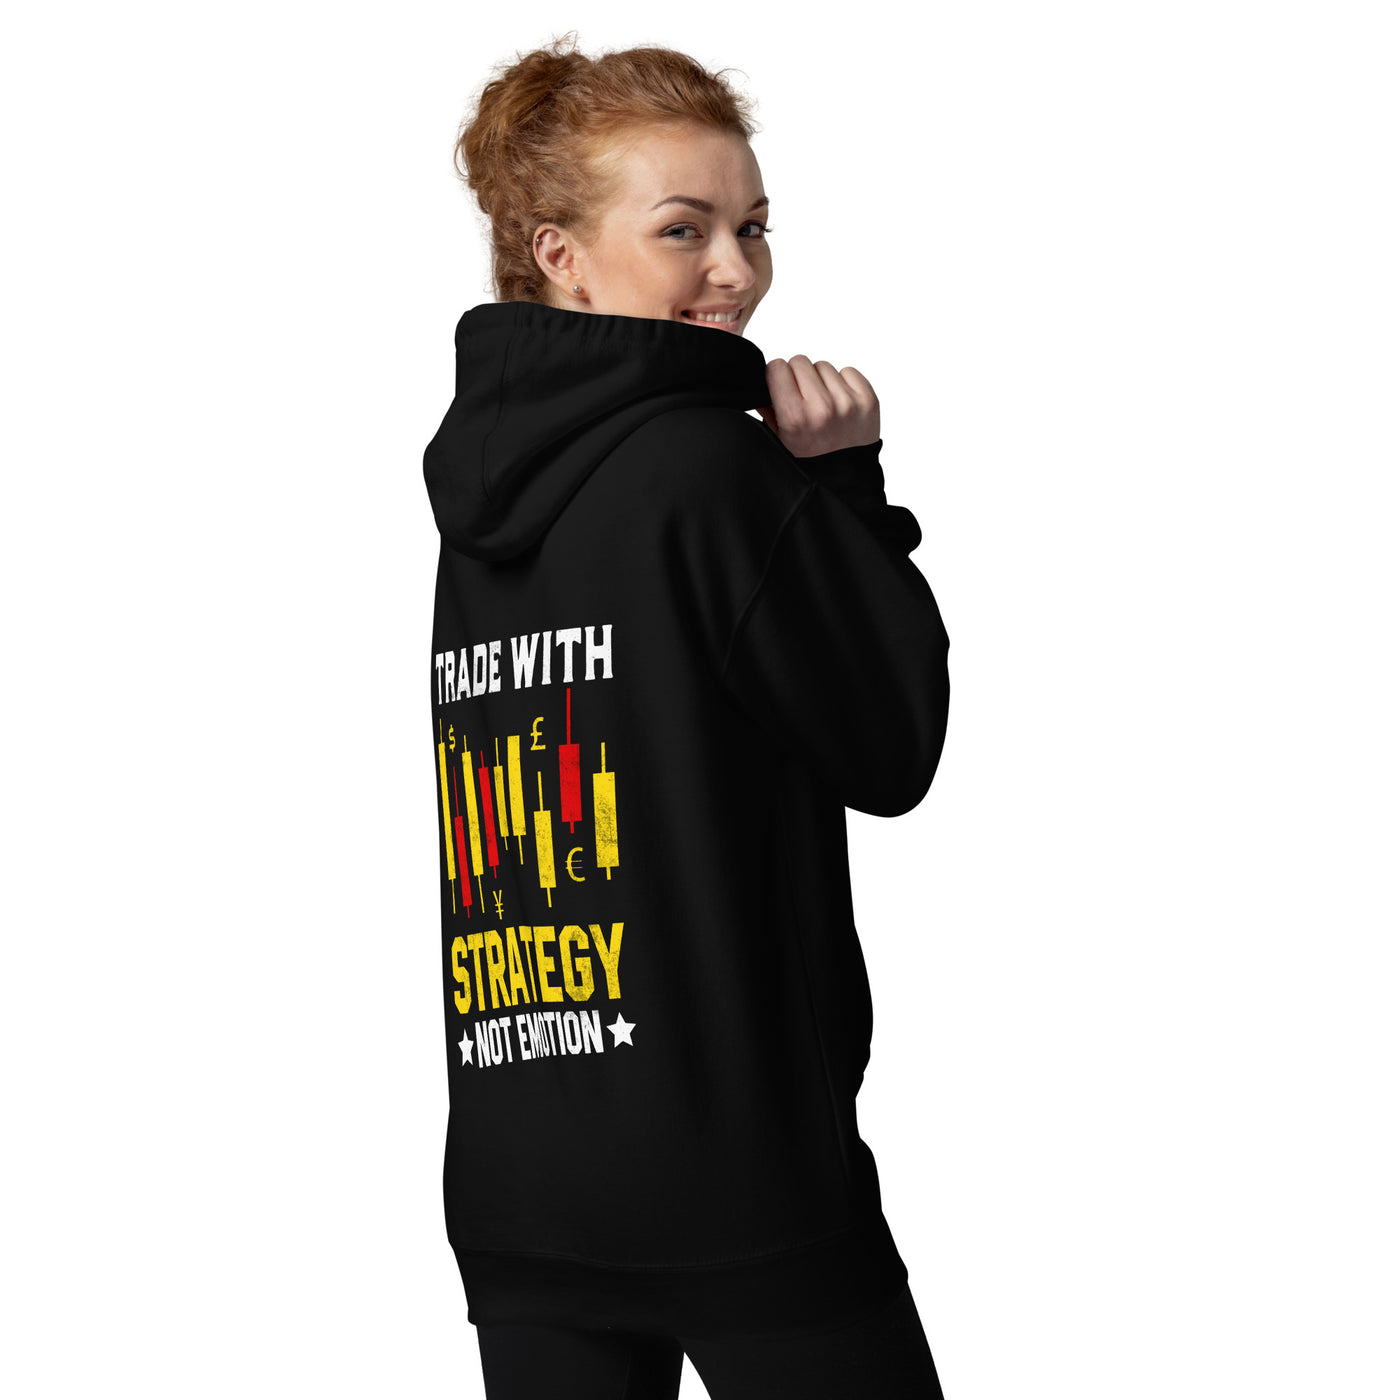 Trade with Strategy not Emotion - Unisex Hoodie ( Back Print )